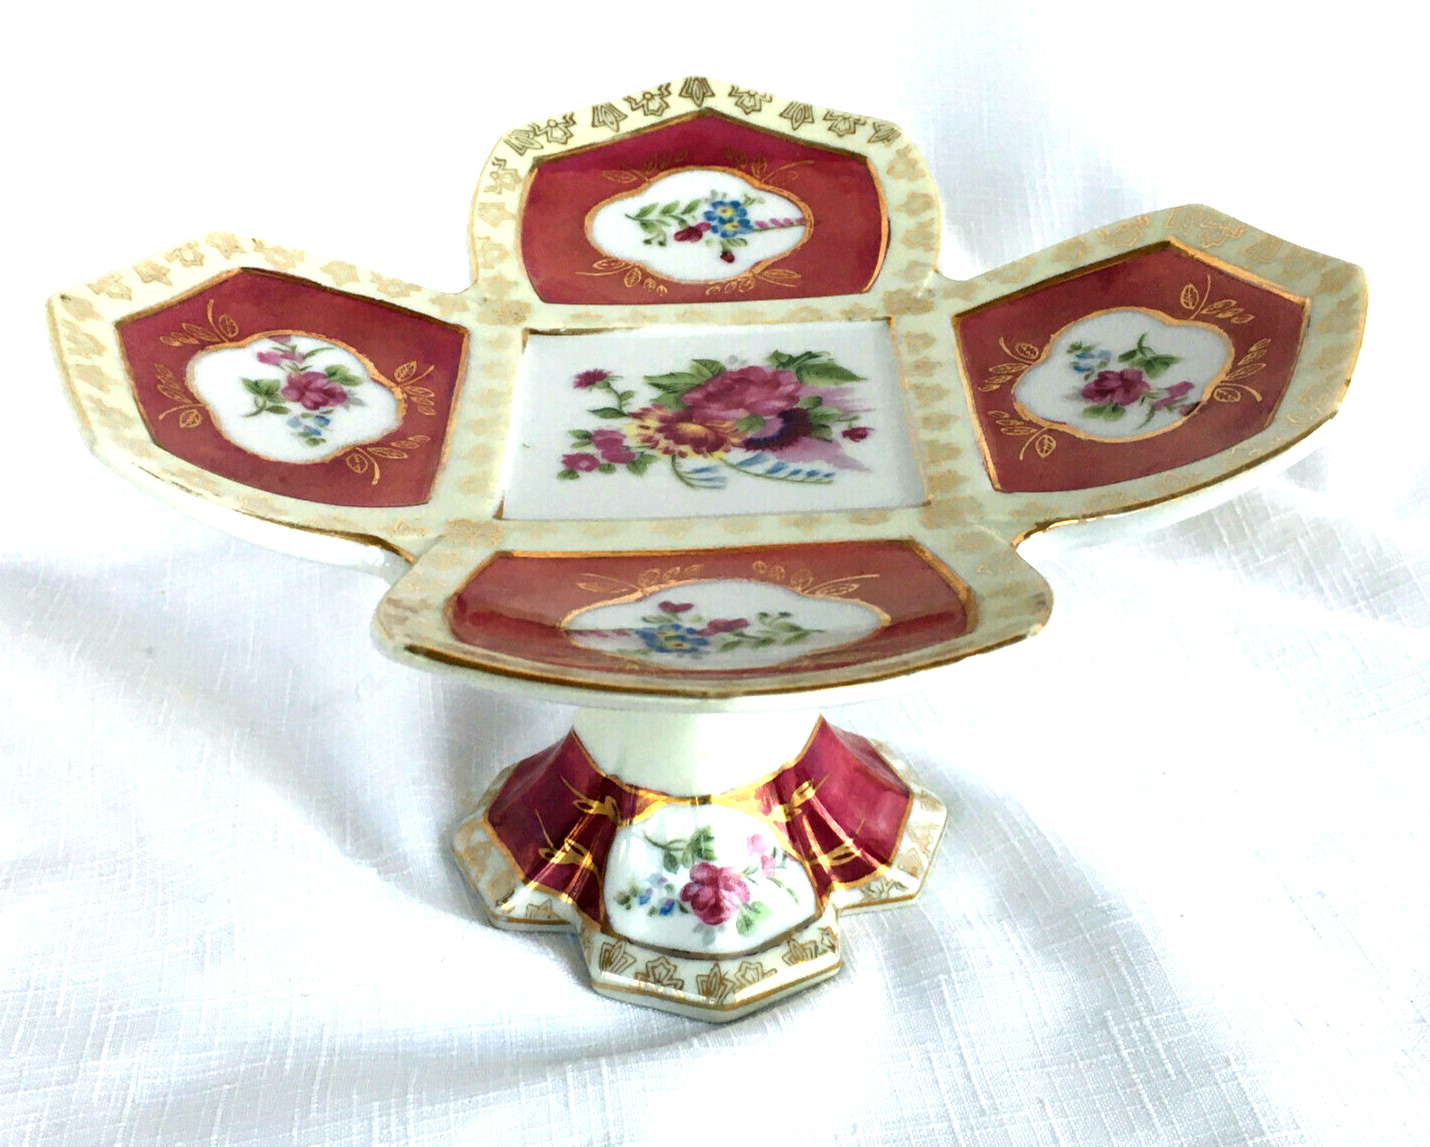 Antique Camille Naudot Porcelain Cookies Candy Footed Plate Dish Pre WW2 France